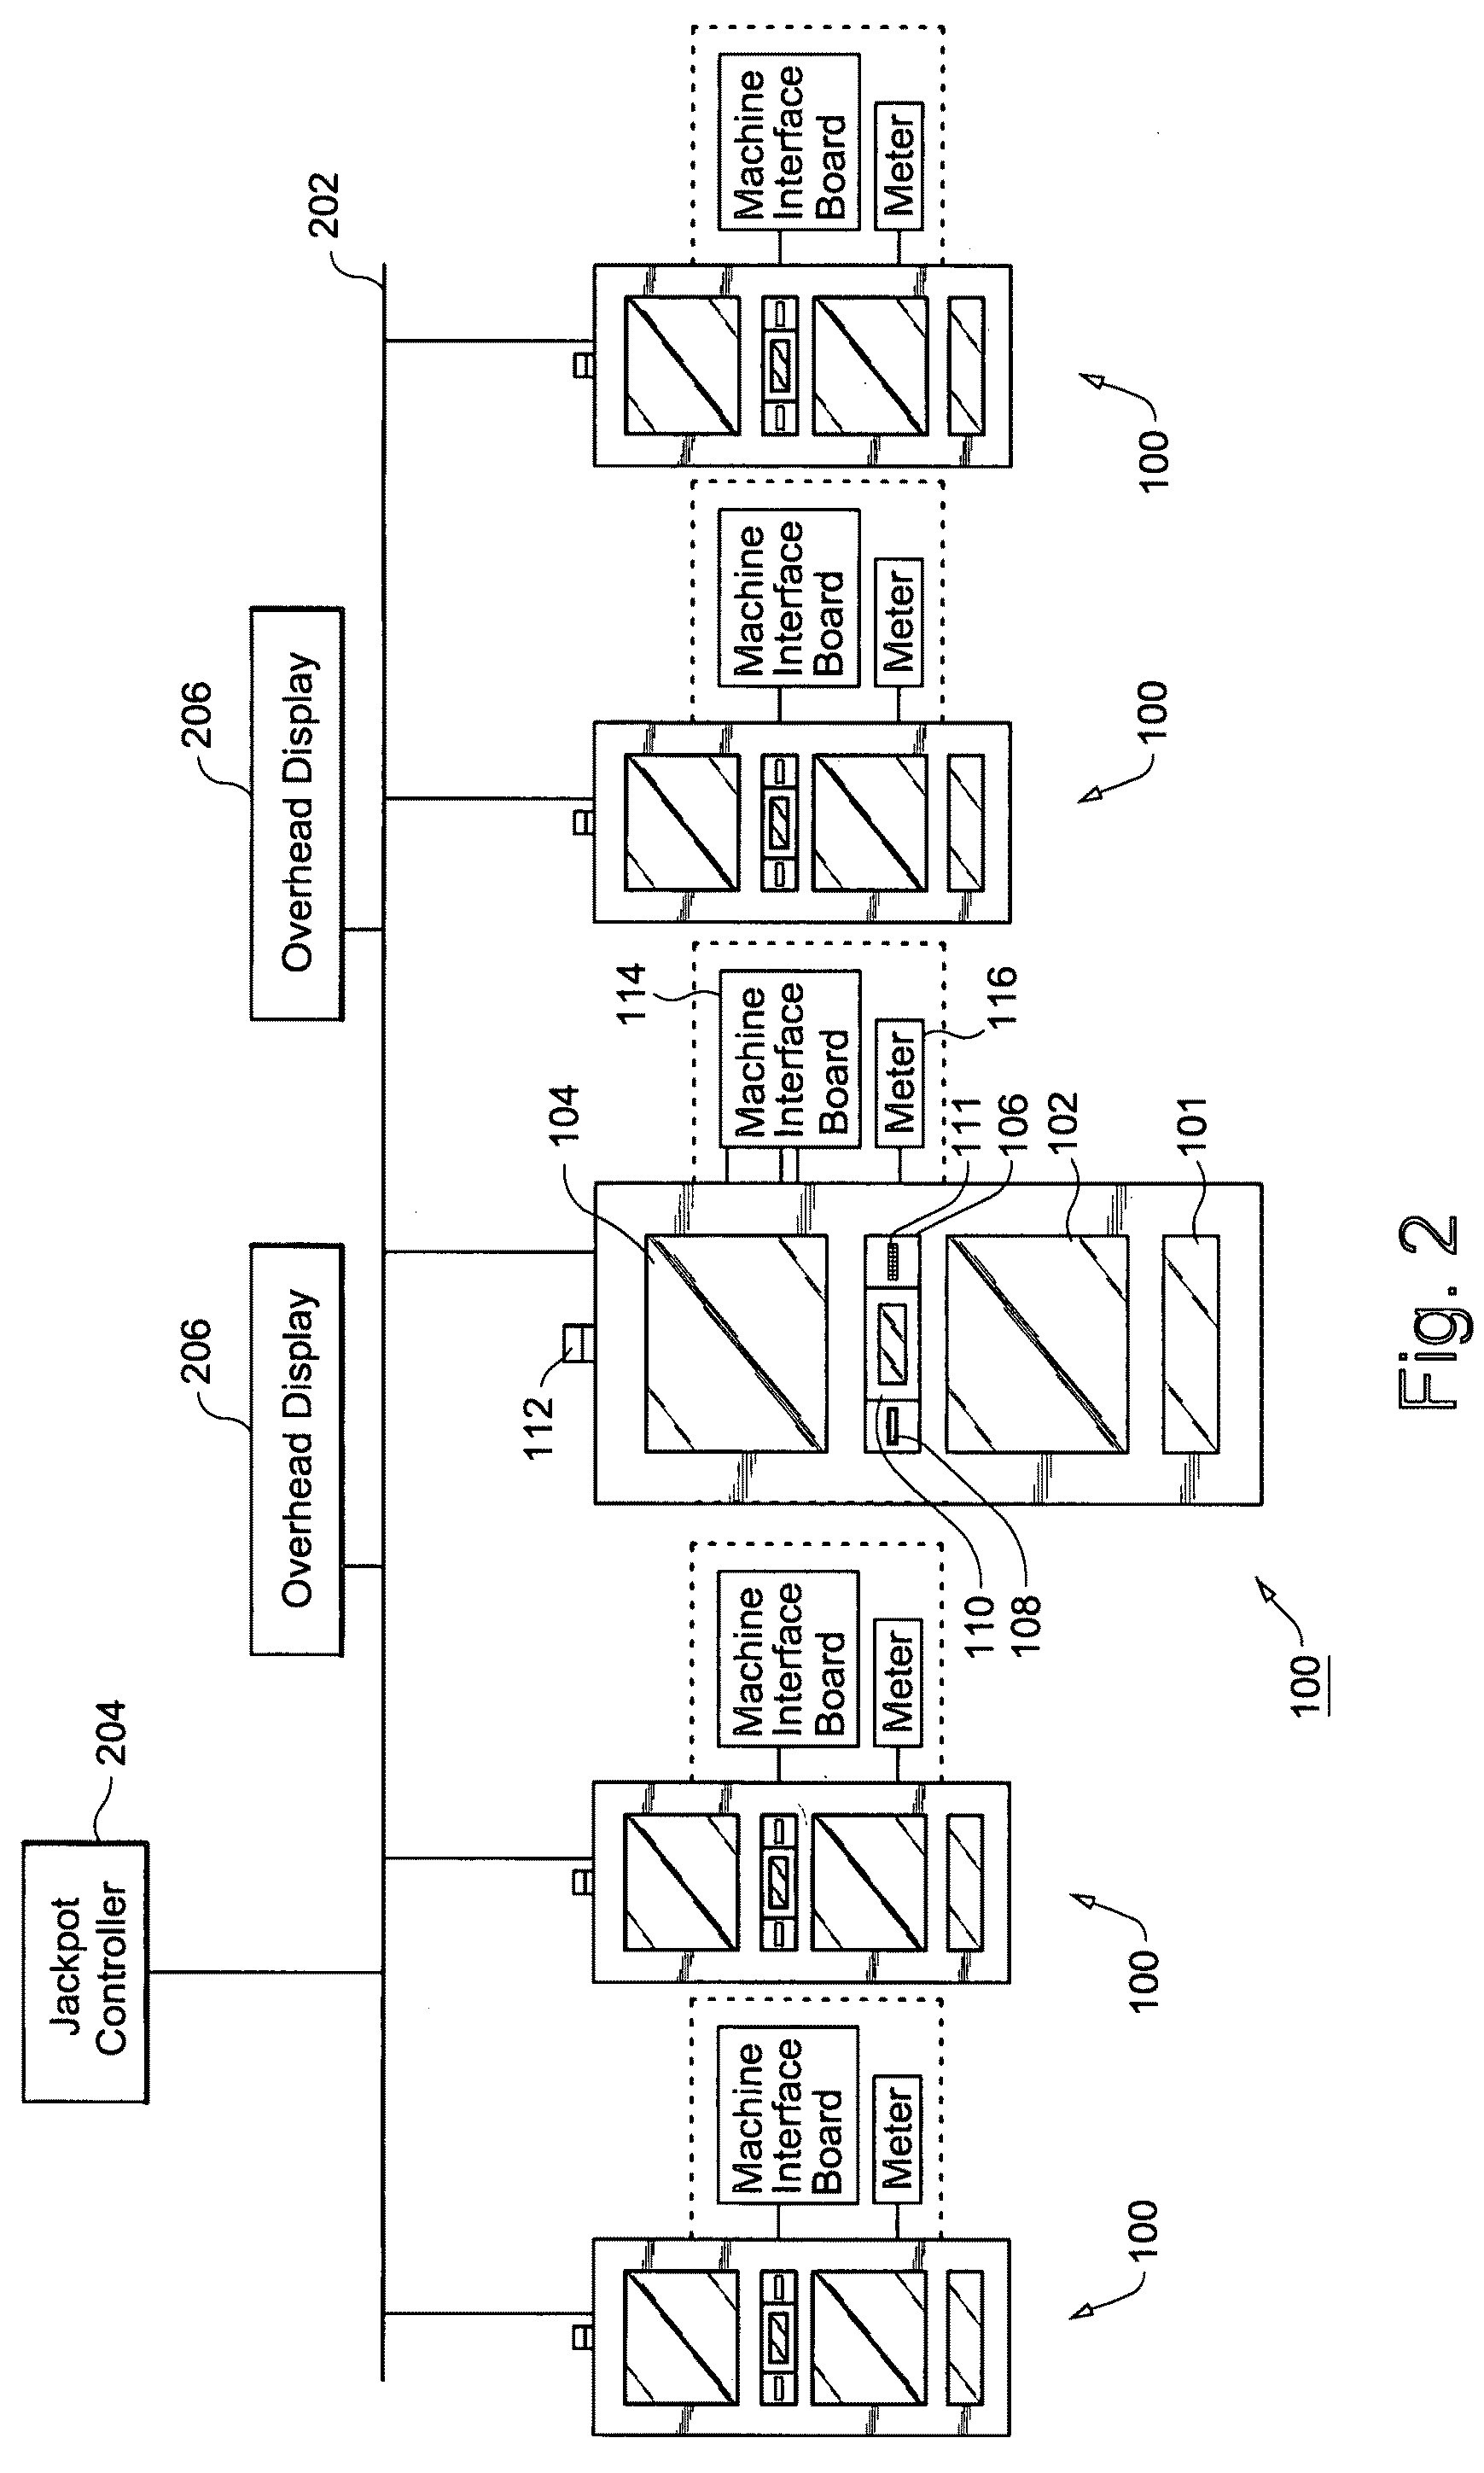 System and/or methods for interpreting and/or re-presenting content in a gaming environment